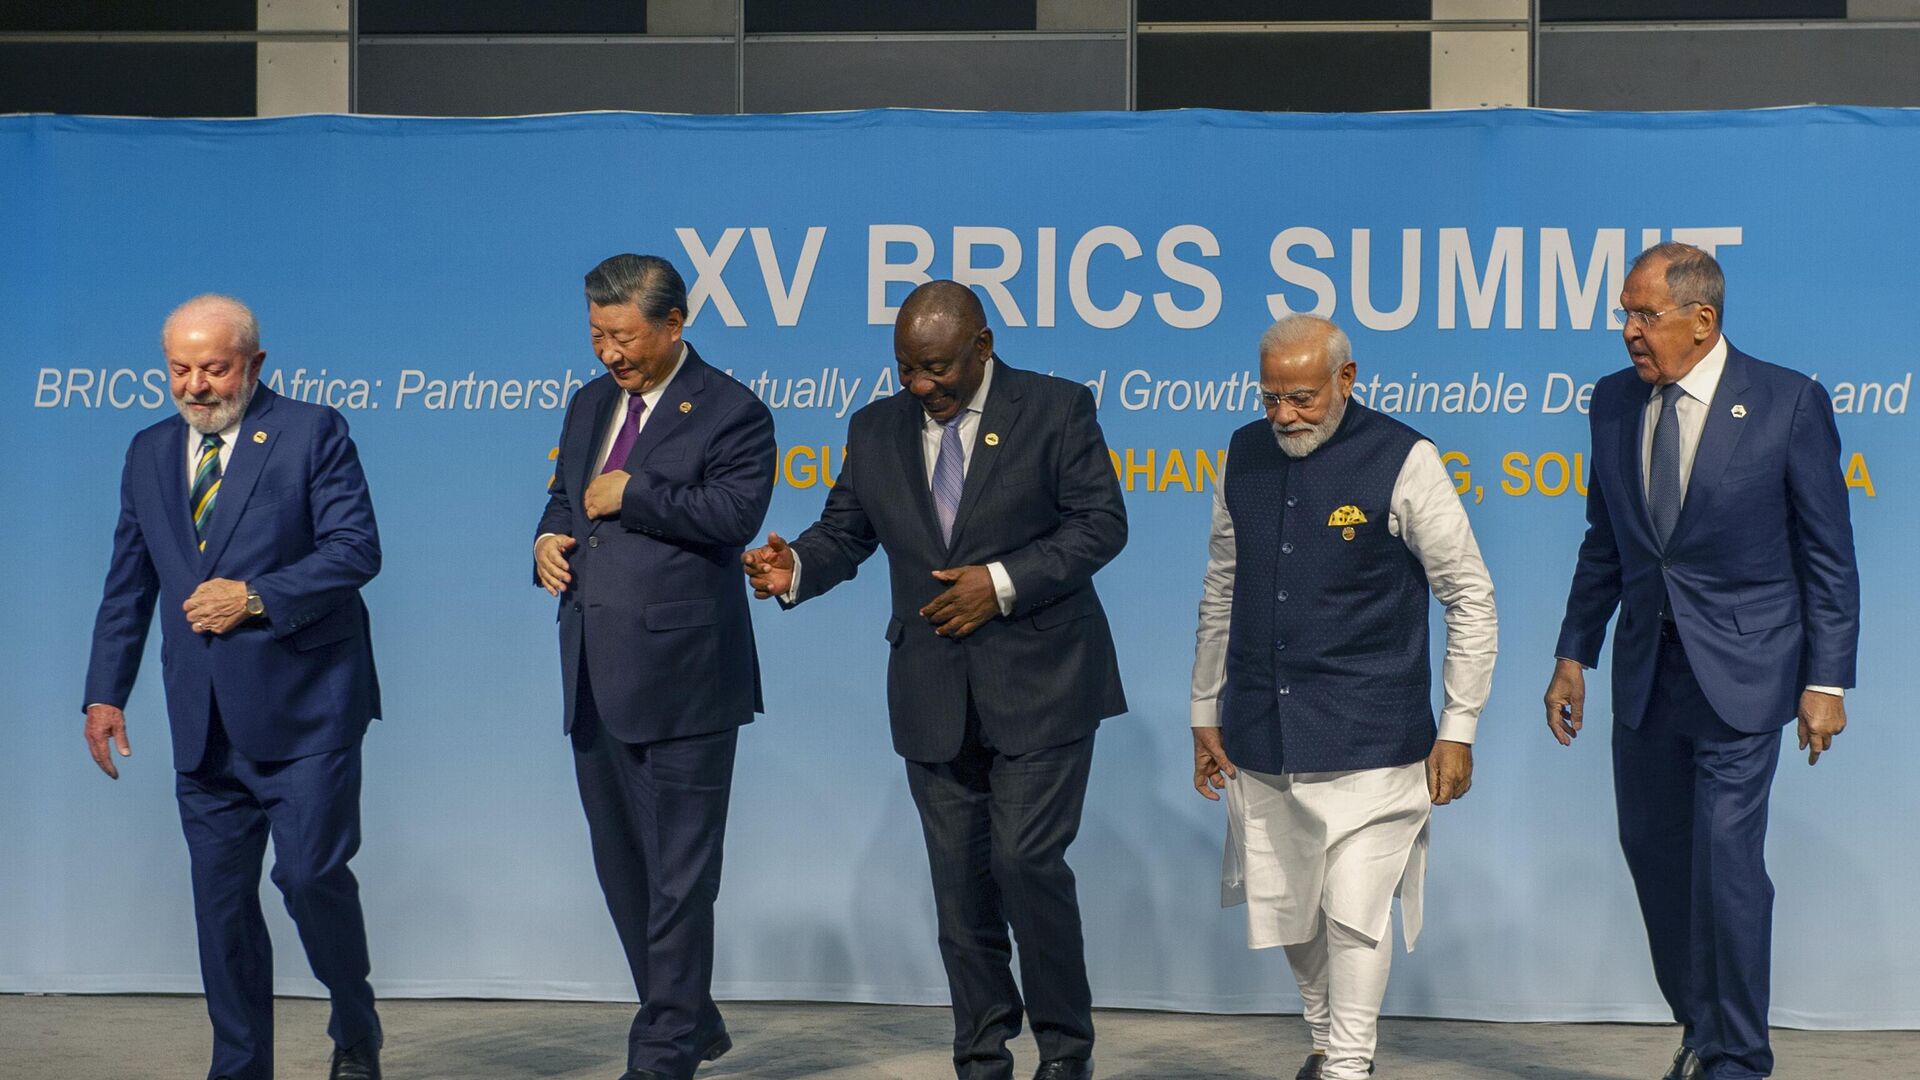 From left, Brazil's President Luiz Inacio Lula da Silva, China's President Xi Jinping, South Africa's President Cyril Ramaphosa, India's Prime Minister Narendra Modi and Russia's Foreign Minister Sergey Lavrov pose for a BRICS group photo during the 2023 BRICS Summit in Johannesburg, South Africa, Aug. 23, 2023. - Sputnik Africa, 1920, 16.10.2023